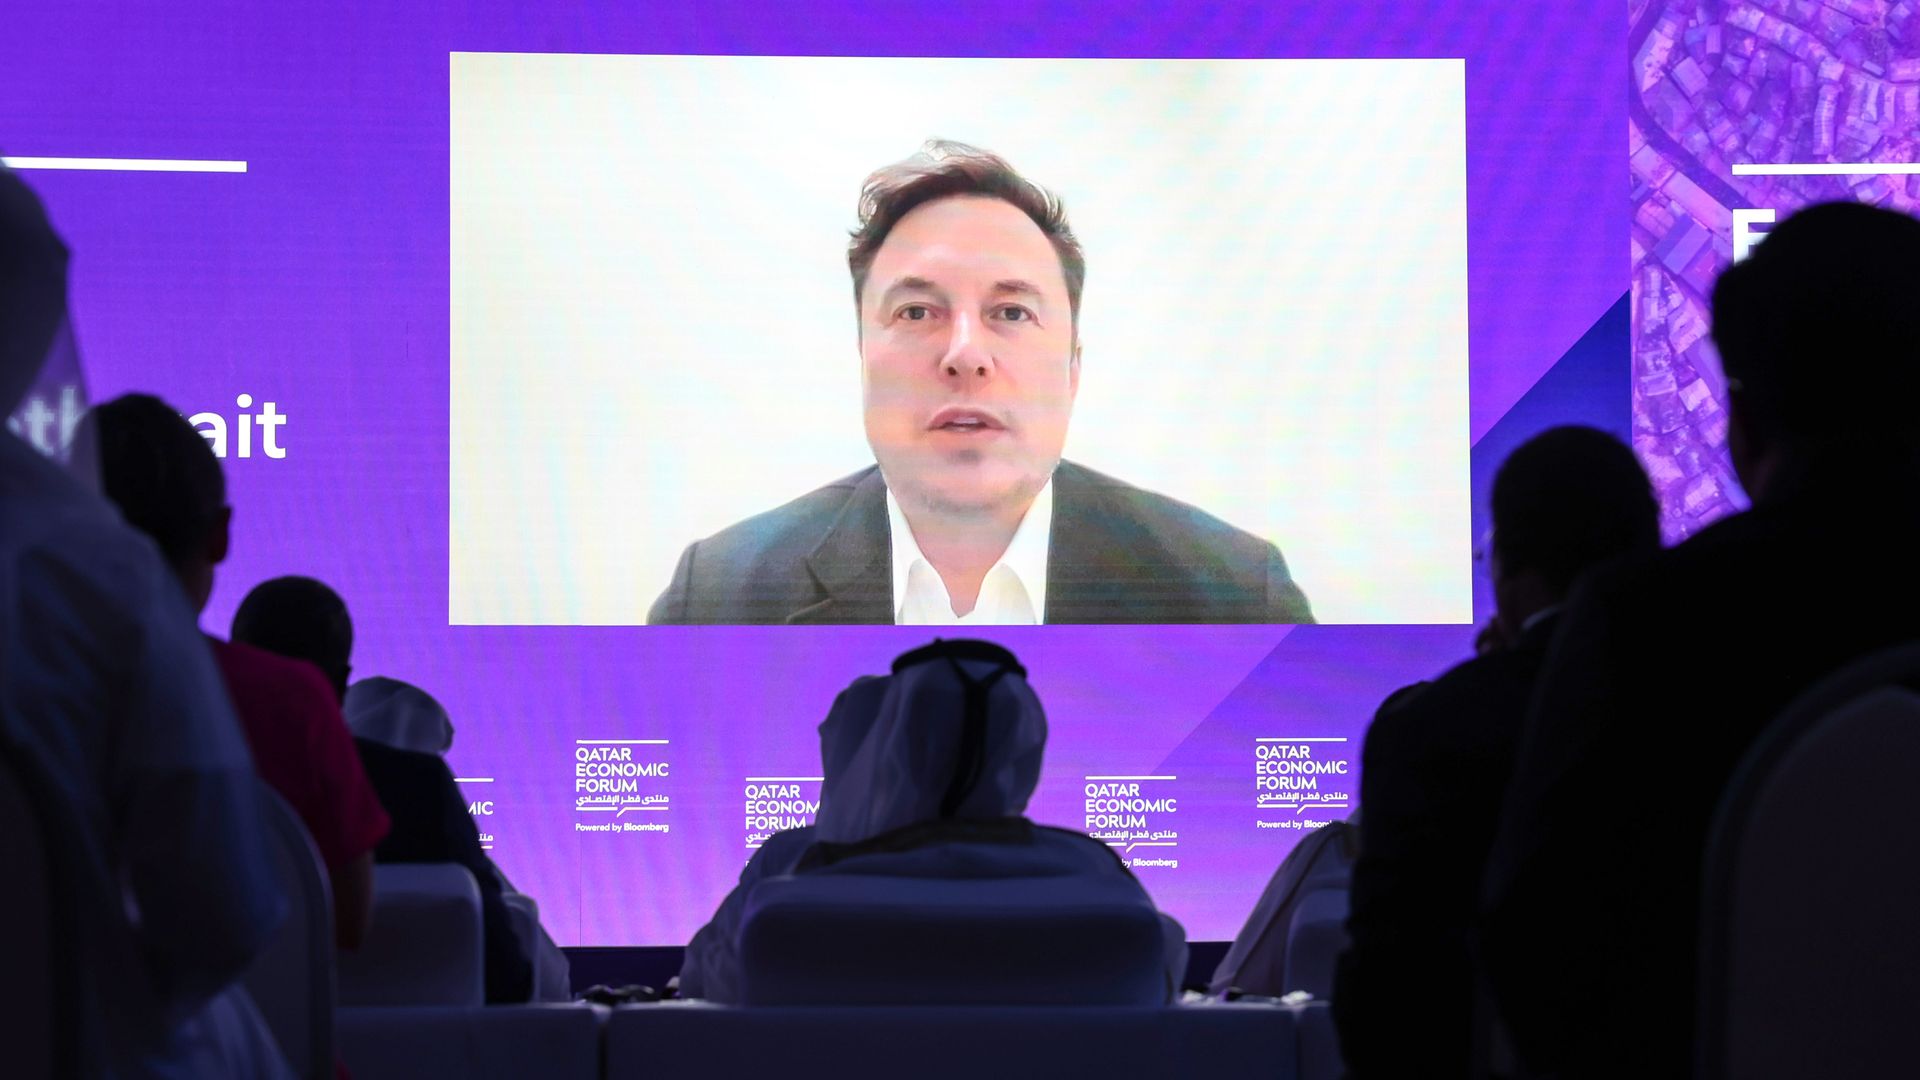 Elon Musk, chief executive officer of Tesla Inc., speaks via video link during the Qatar Economic Forum in Doha, Qatar, on Tuesday, June 21, 2022. 